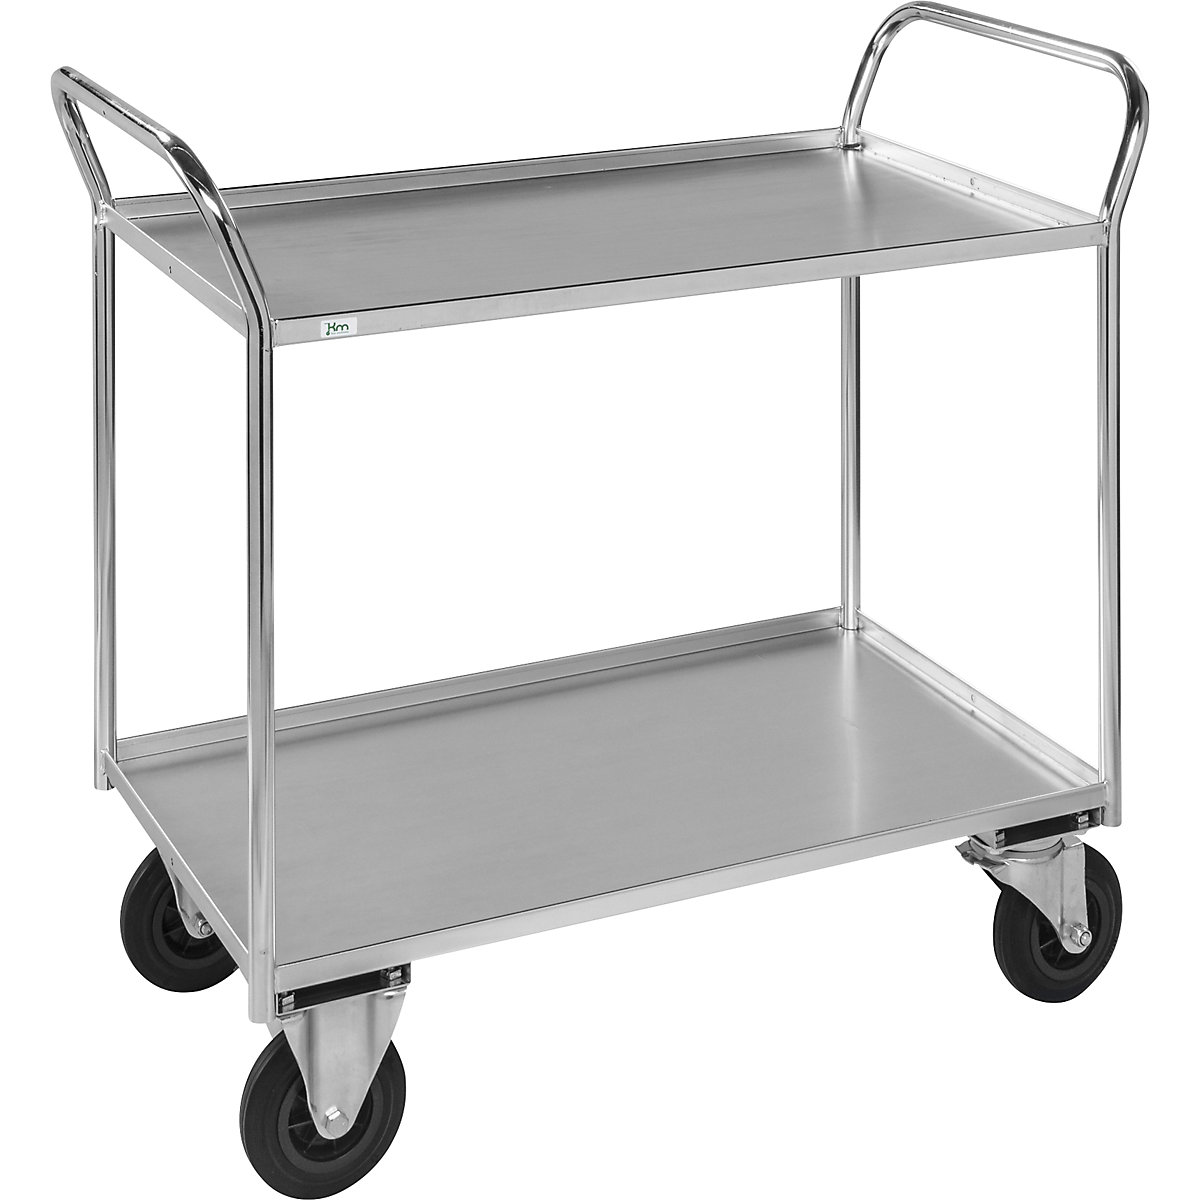 KM41 table trolley – Kongamek, 2 shelves with raised edges, LxWxH 1070 x 550 x 1000 mm, zinc plated, 2 swivel castors with stops, 2 fixed castors, 5+ items-2